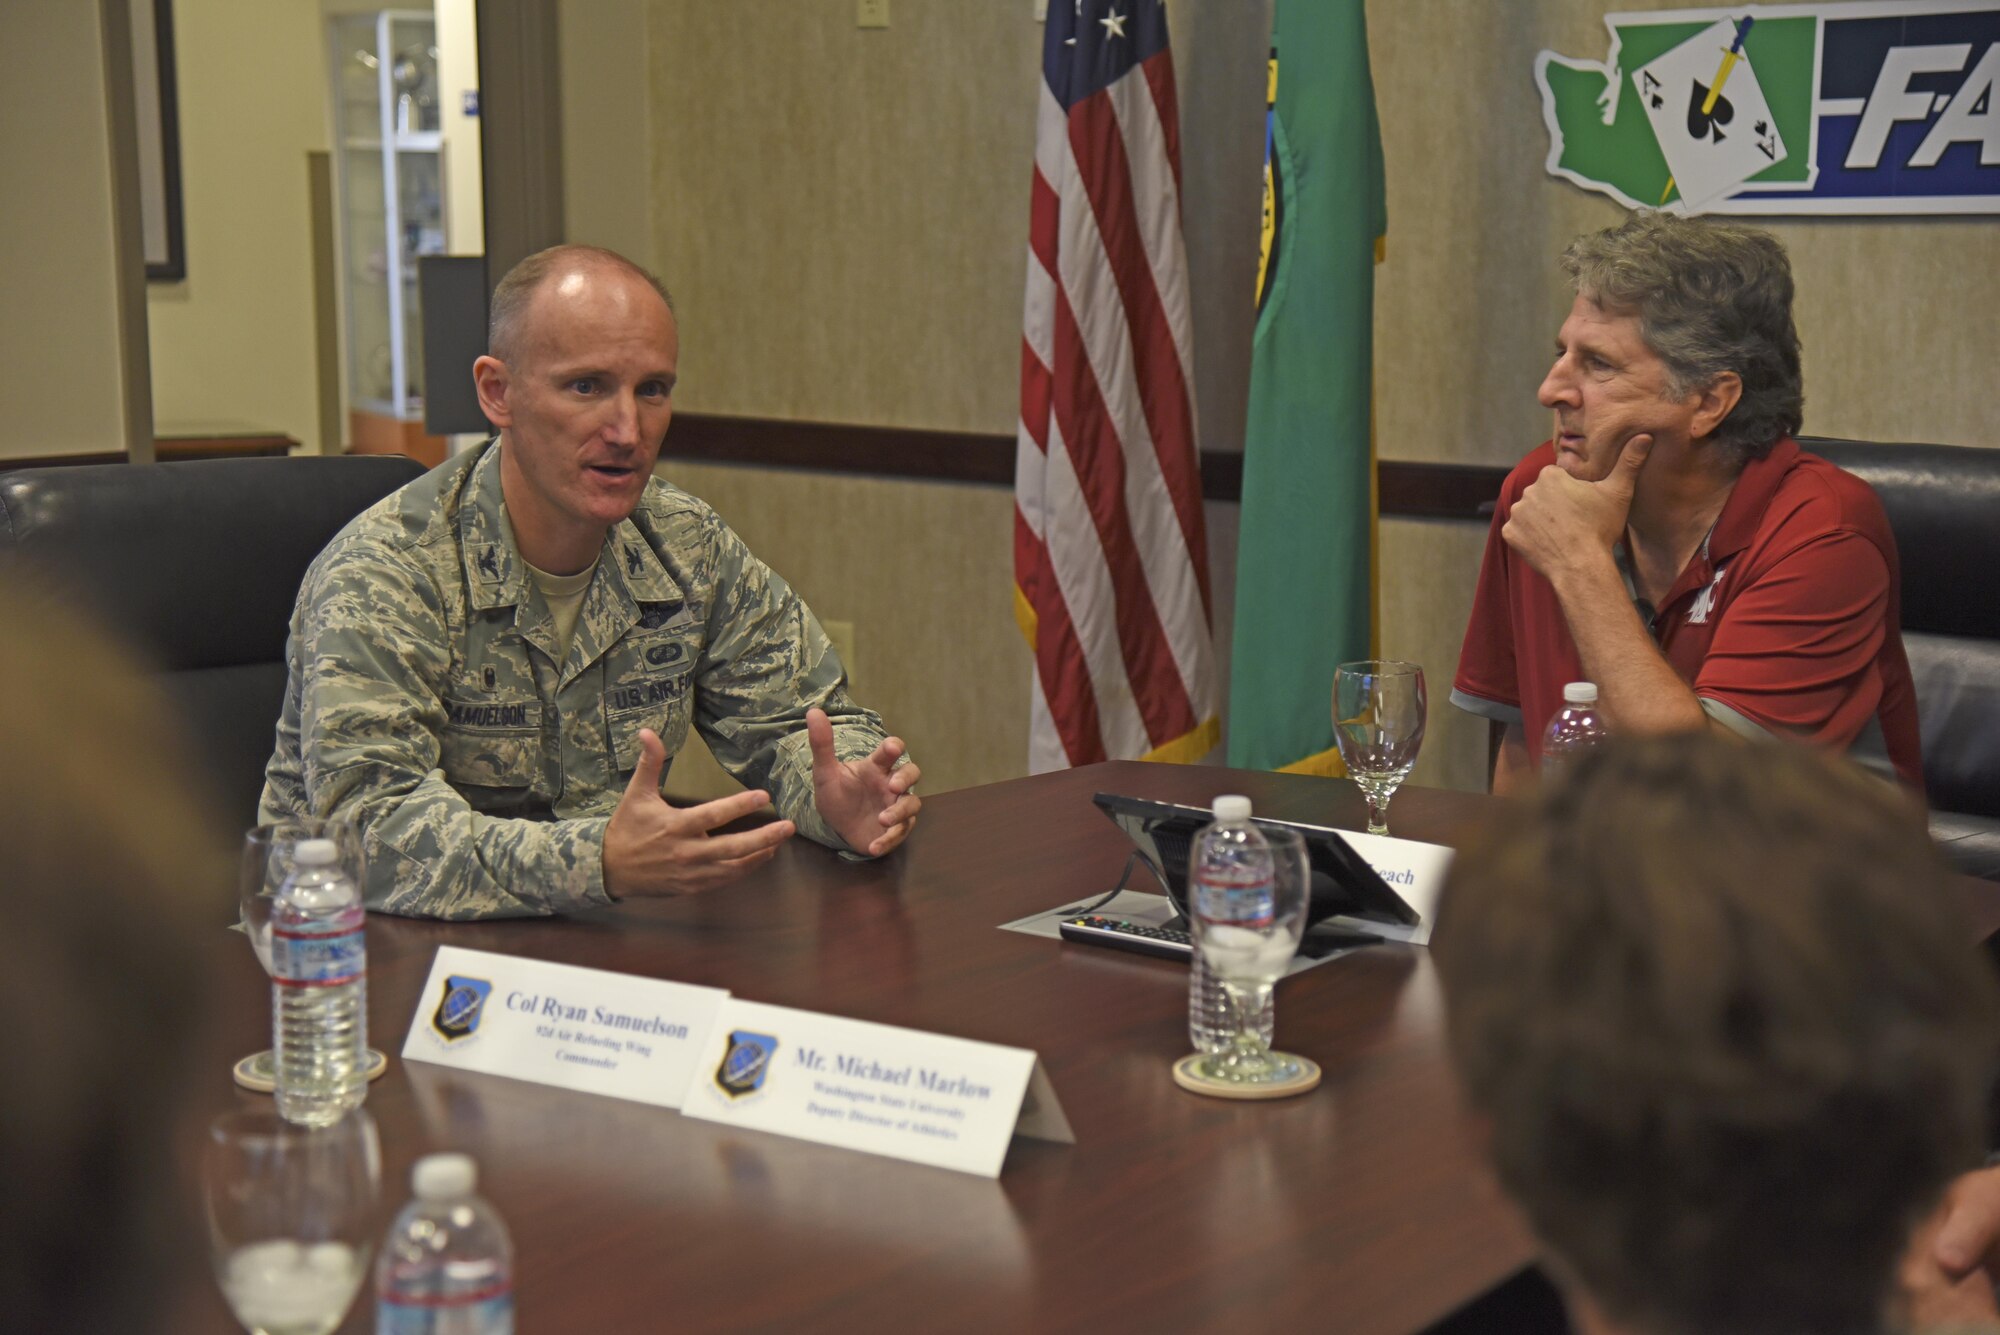 Col. Ryan Samuelson, 92nd Air Refueling Wing commander provides Mike Leach, Washington State University head football coach, a mission briefing during his visit Aug. 15, 2017, at Fairchild Air Force Base, Washington. Leach’s father, Frank, served in the Air Force during the Korean War. He was stationed at Deep Creek, one of four storage facilities near present-day Fairchild used for Nike missiles during the 1950s and 1960s. (U.S. Air Force photo/Senior Airman Mackenzie Richardson)